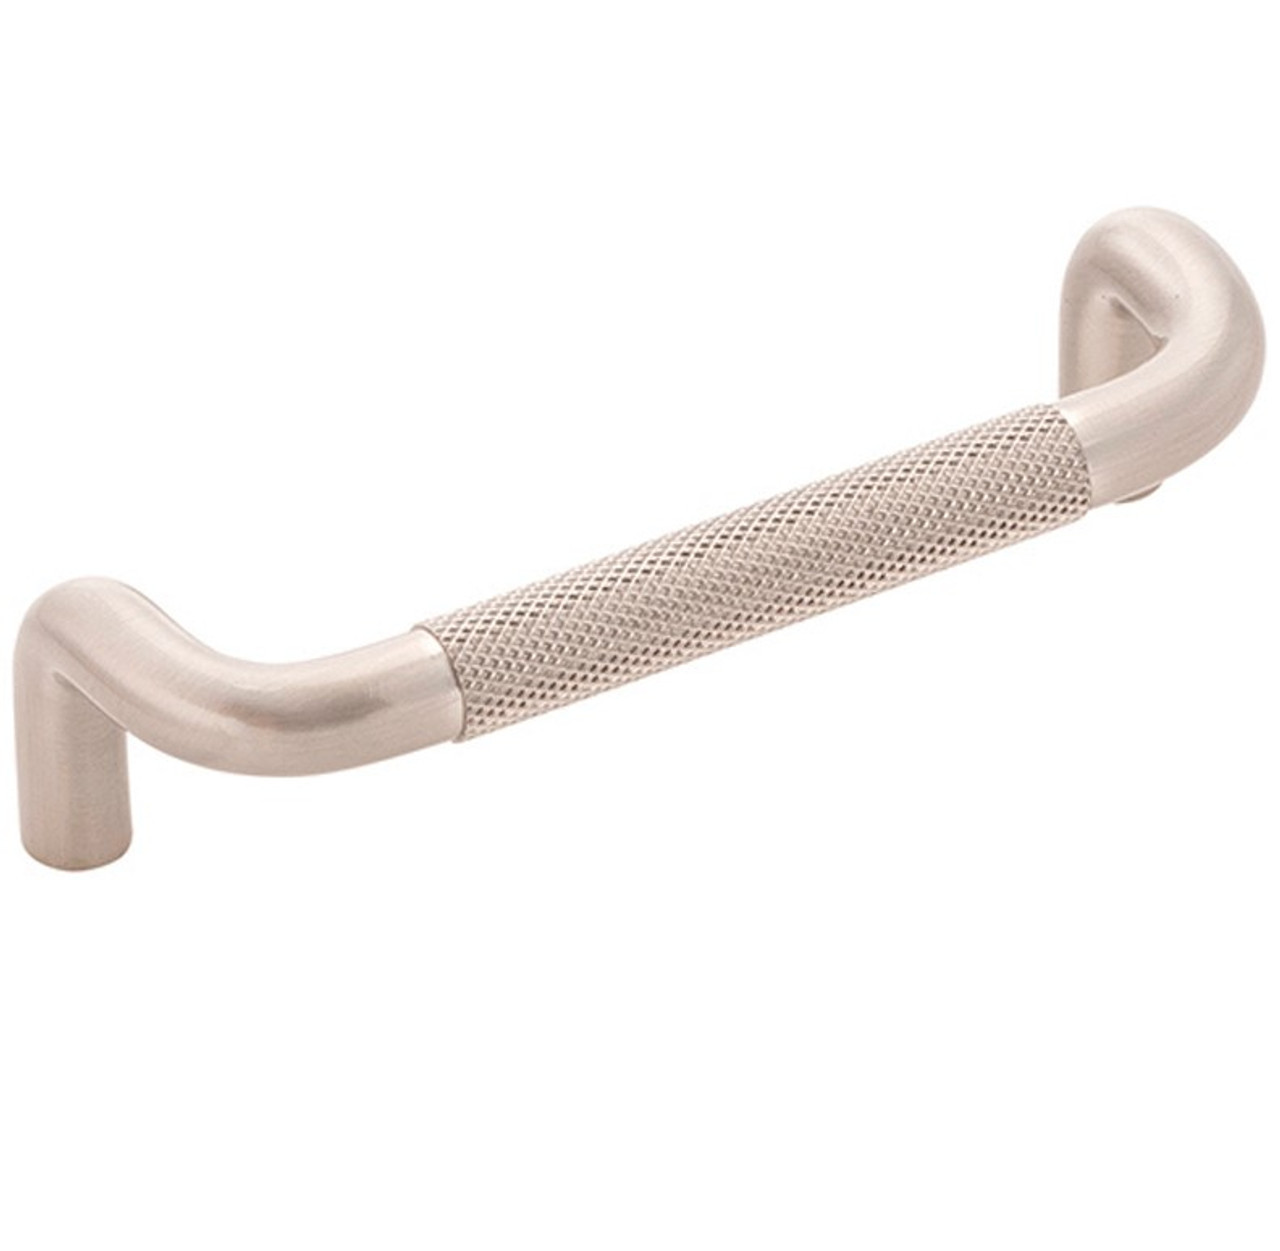 Belwith Keeler Verge Offset Pulls Knurled Surface